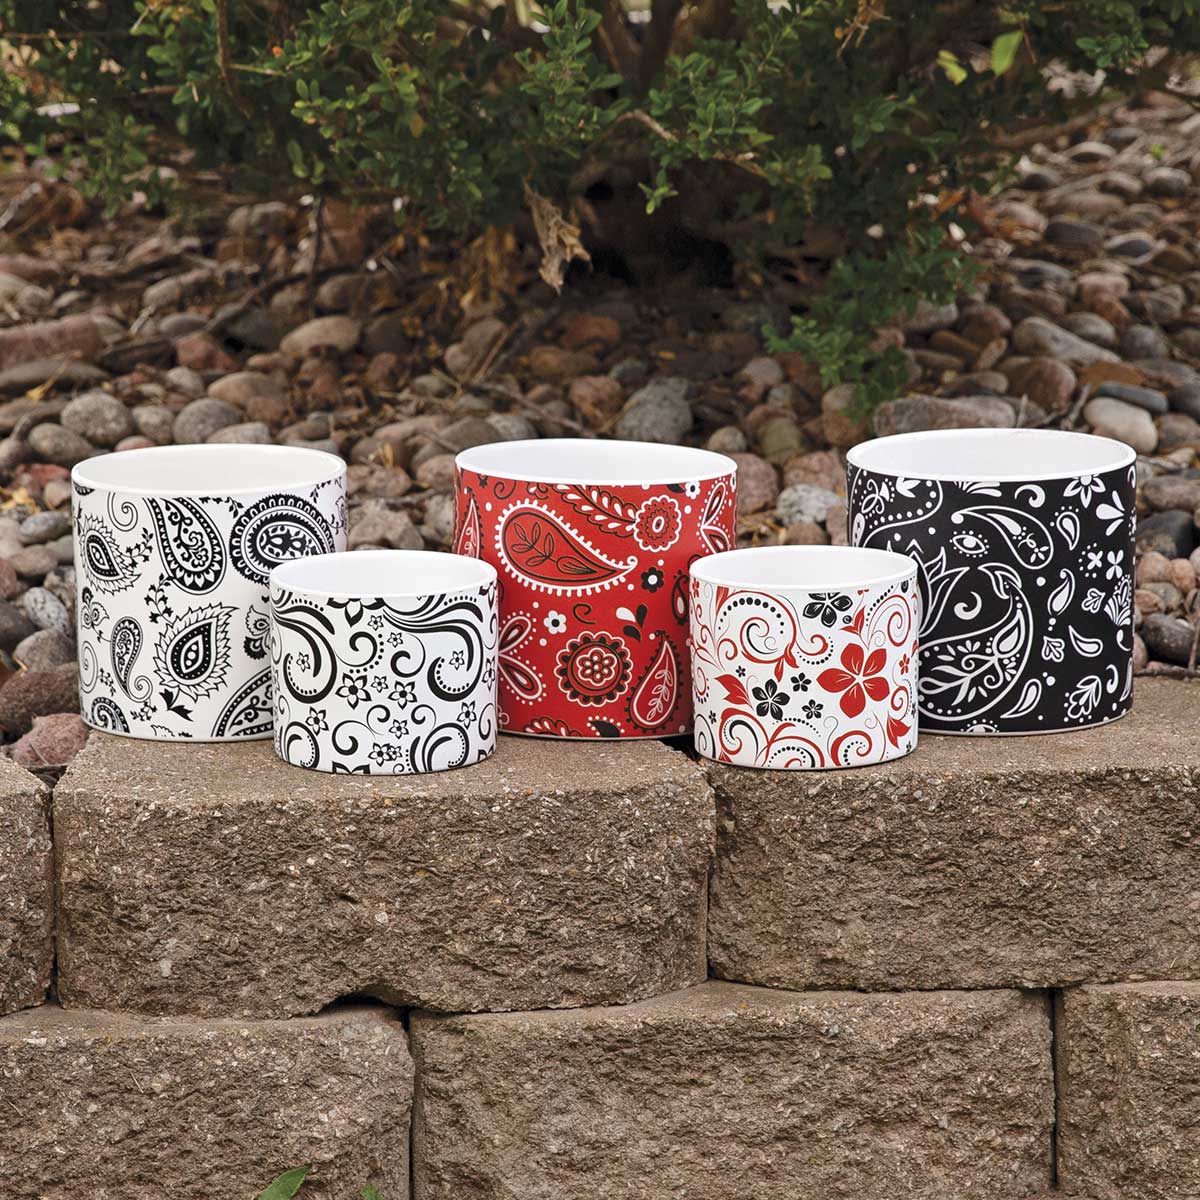 b50 POT CLASSIC PAISLEY LARGE 5IN X 4.75IN BLACK/WHITE PORCELAIN